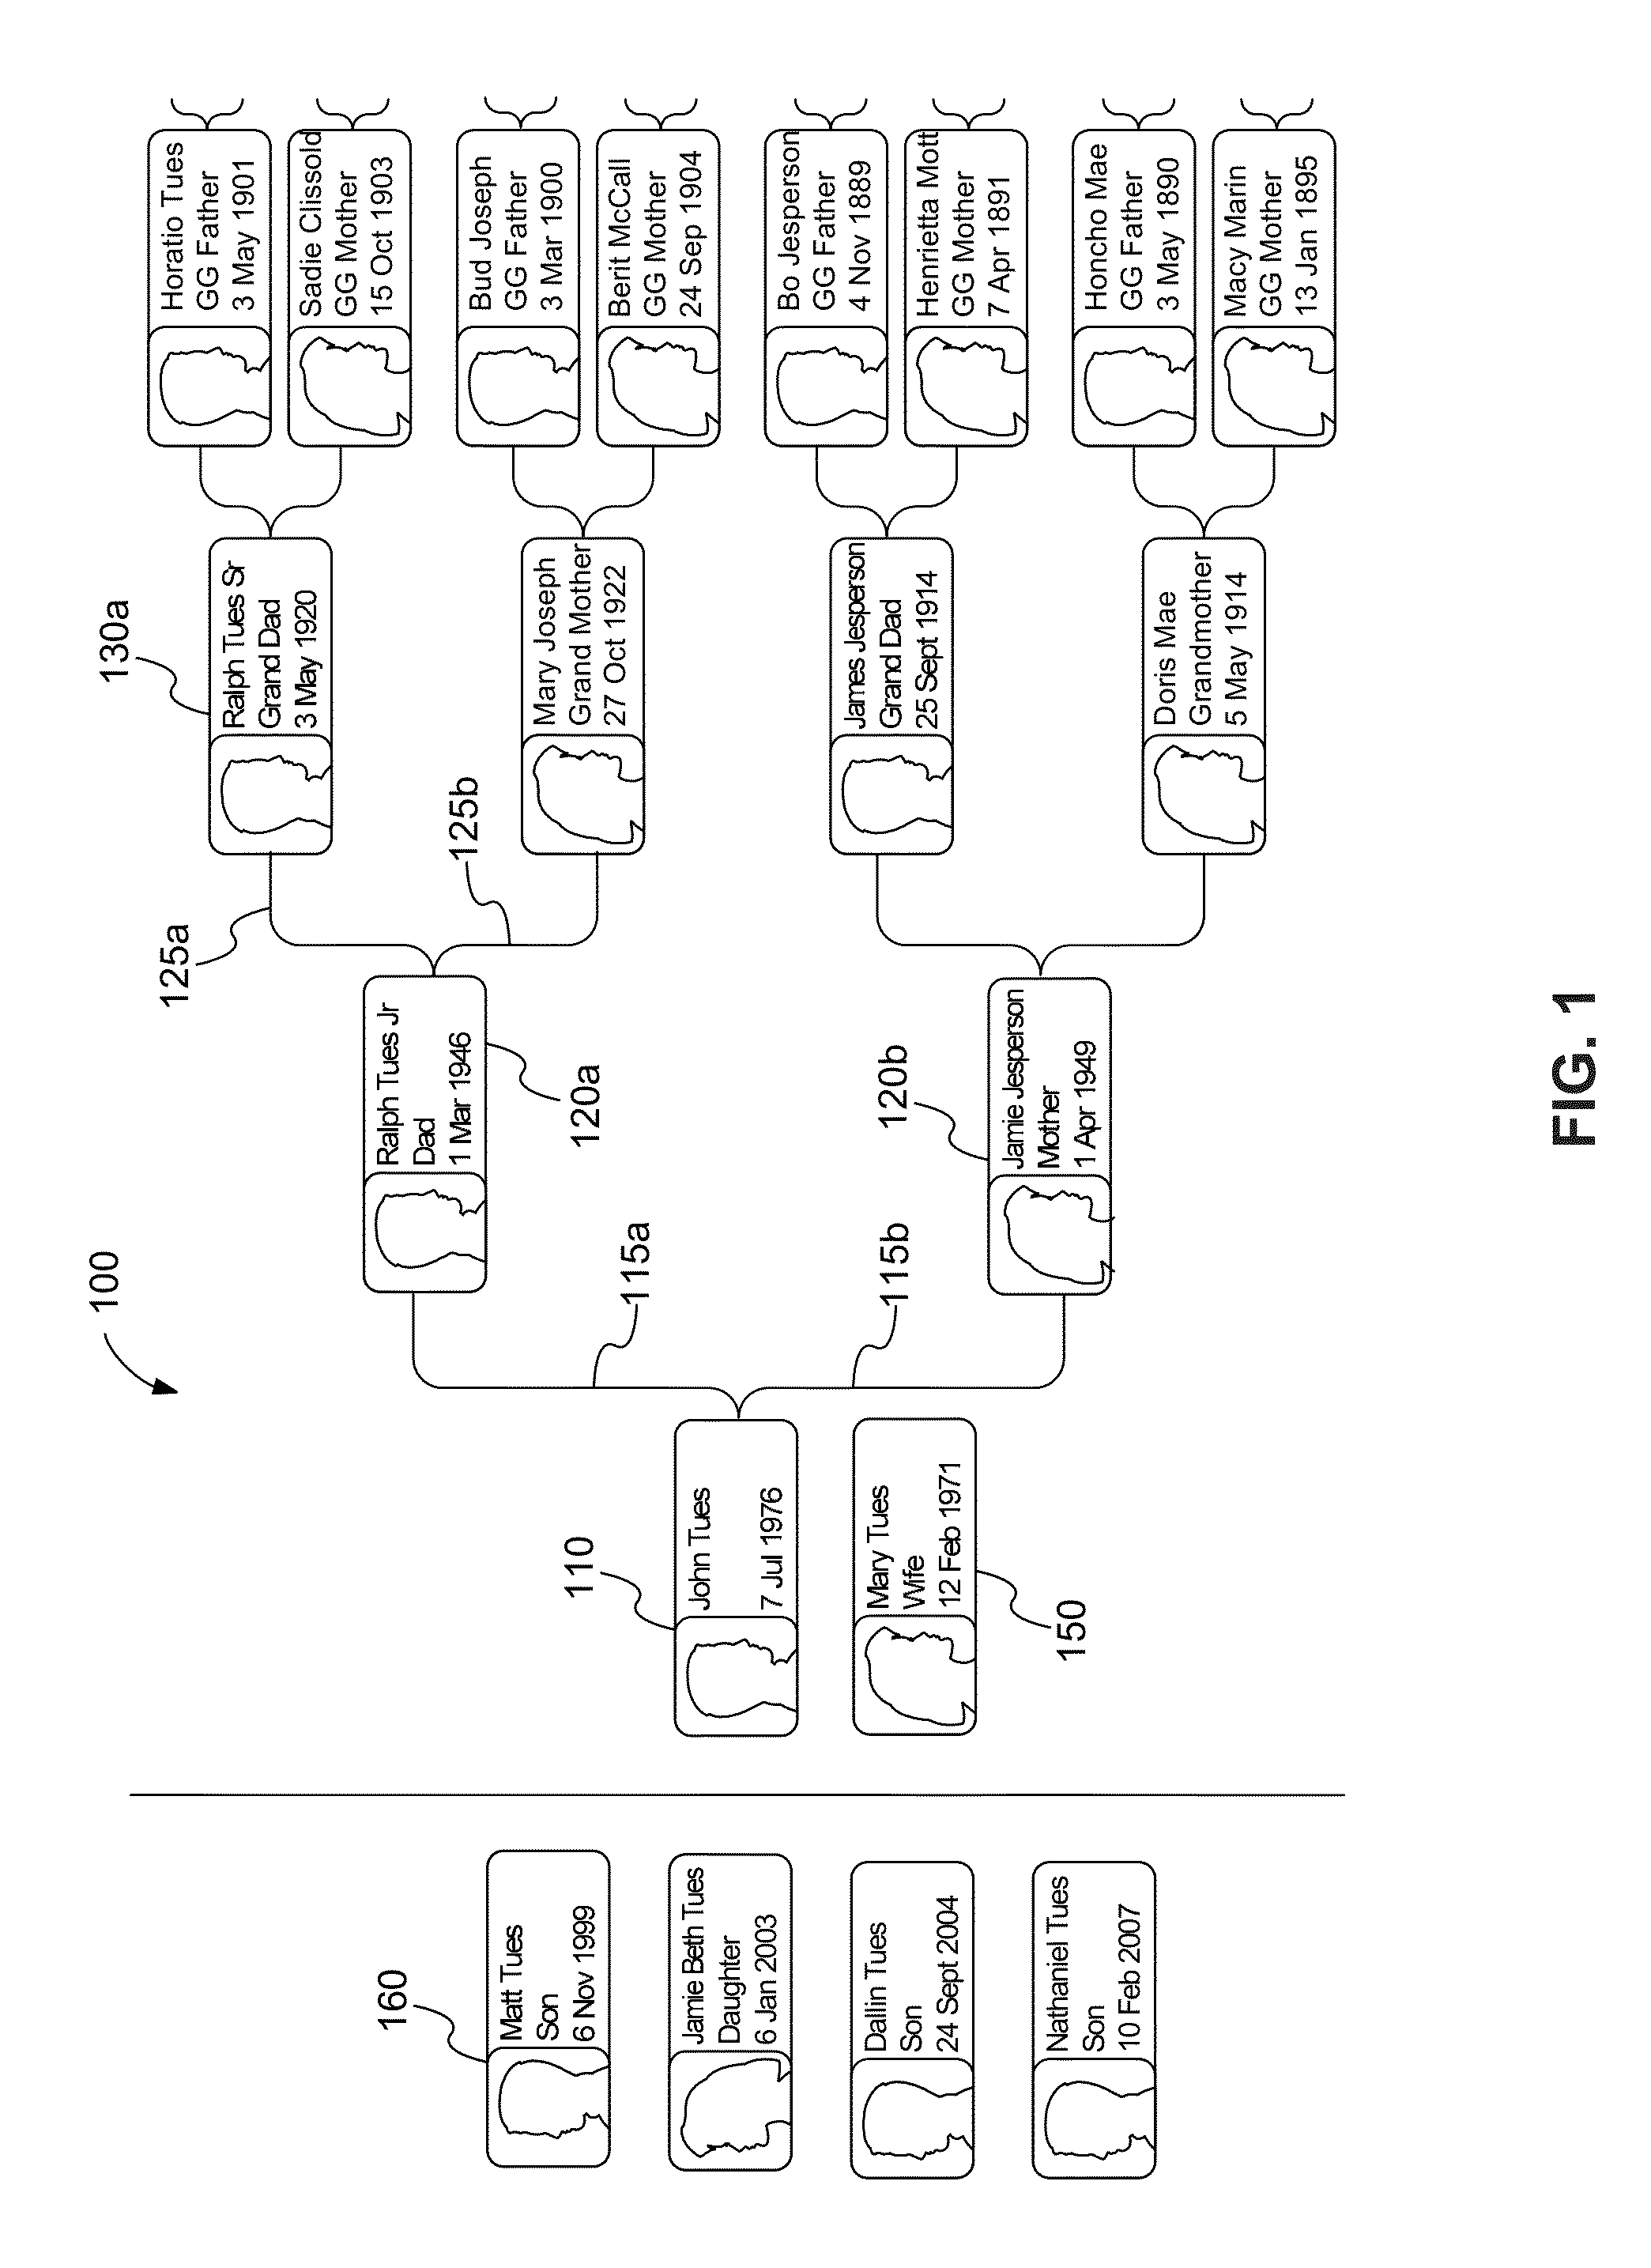 Methods and system for displaying pedigree charts on a touch device